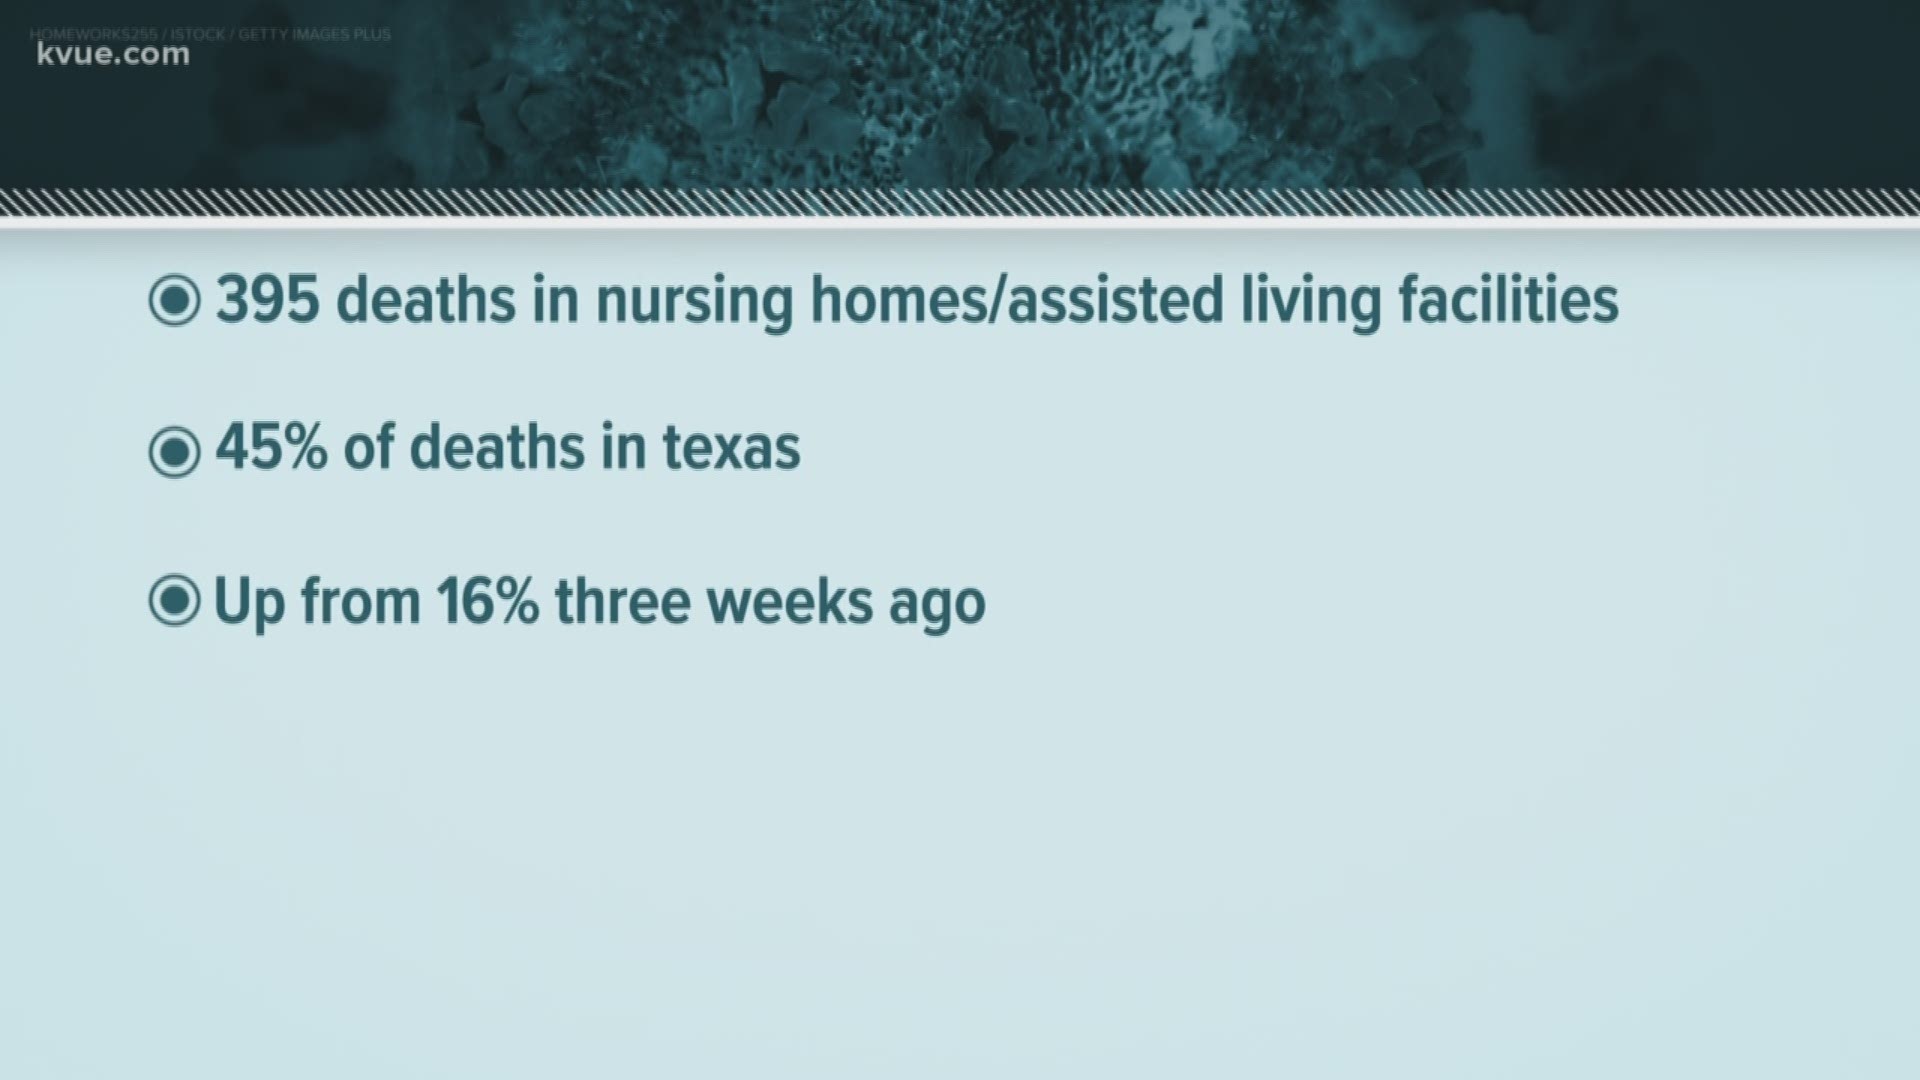 A new KVUE Defenders analysis finds that nearly half of the coronavirus deaths in Texas come from state nursing homes.